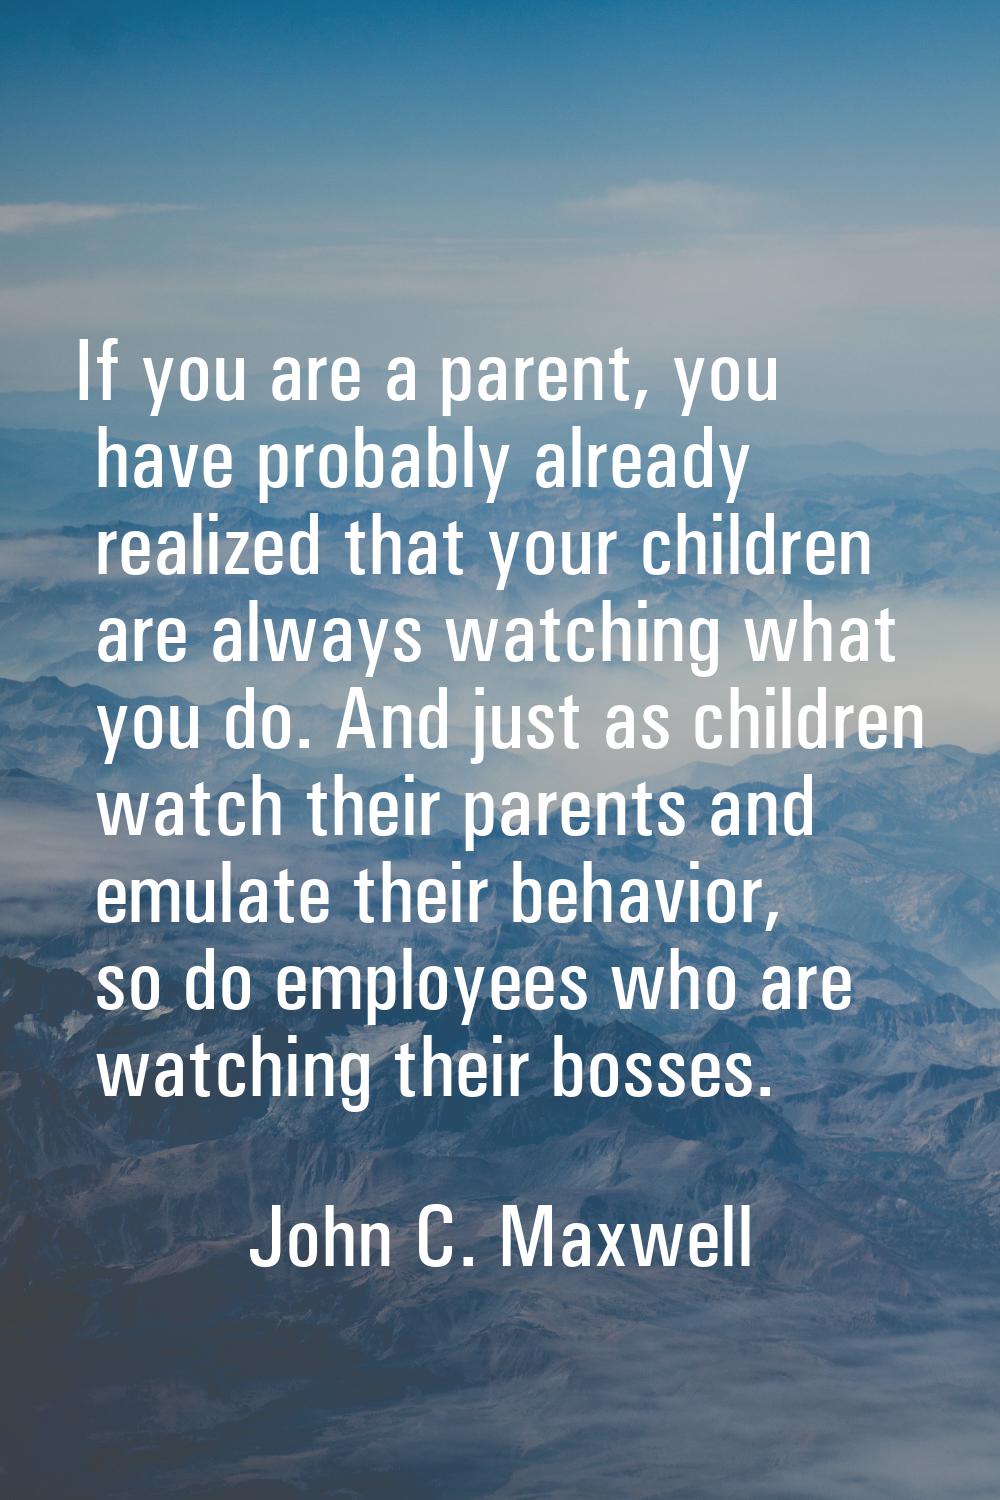 If you are a parent, you have probably already realized that your children are always watching what